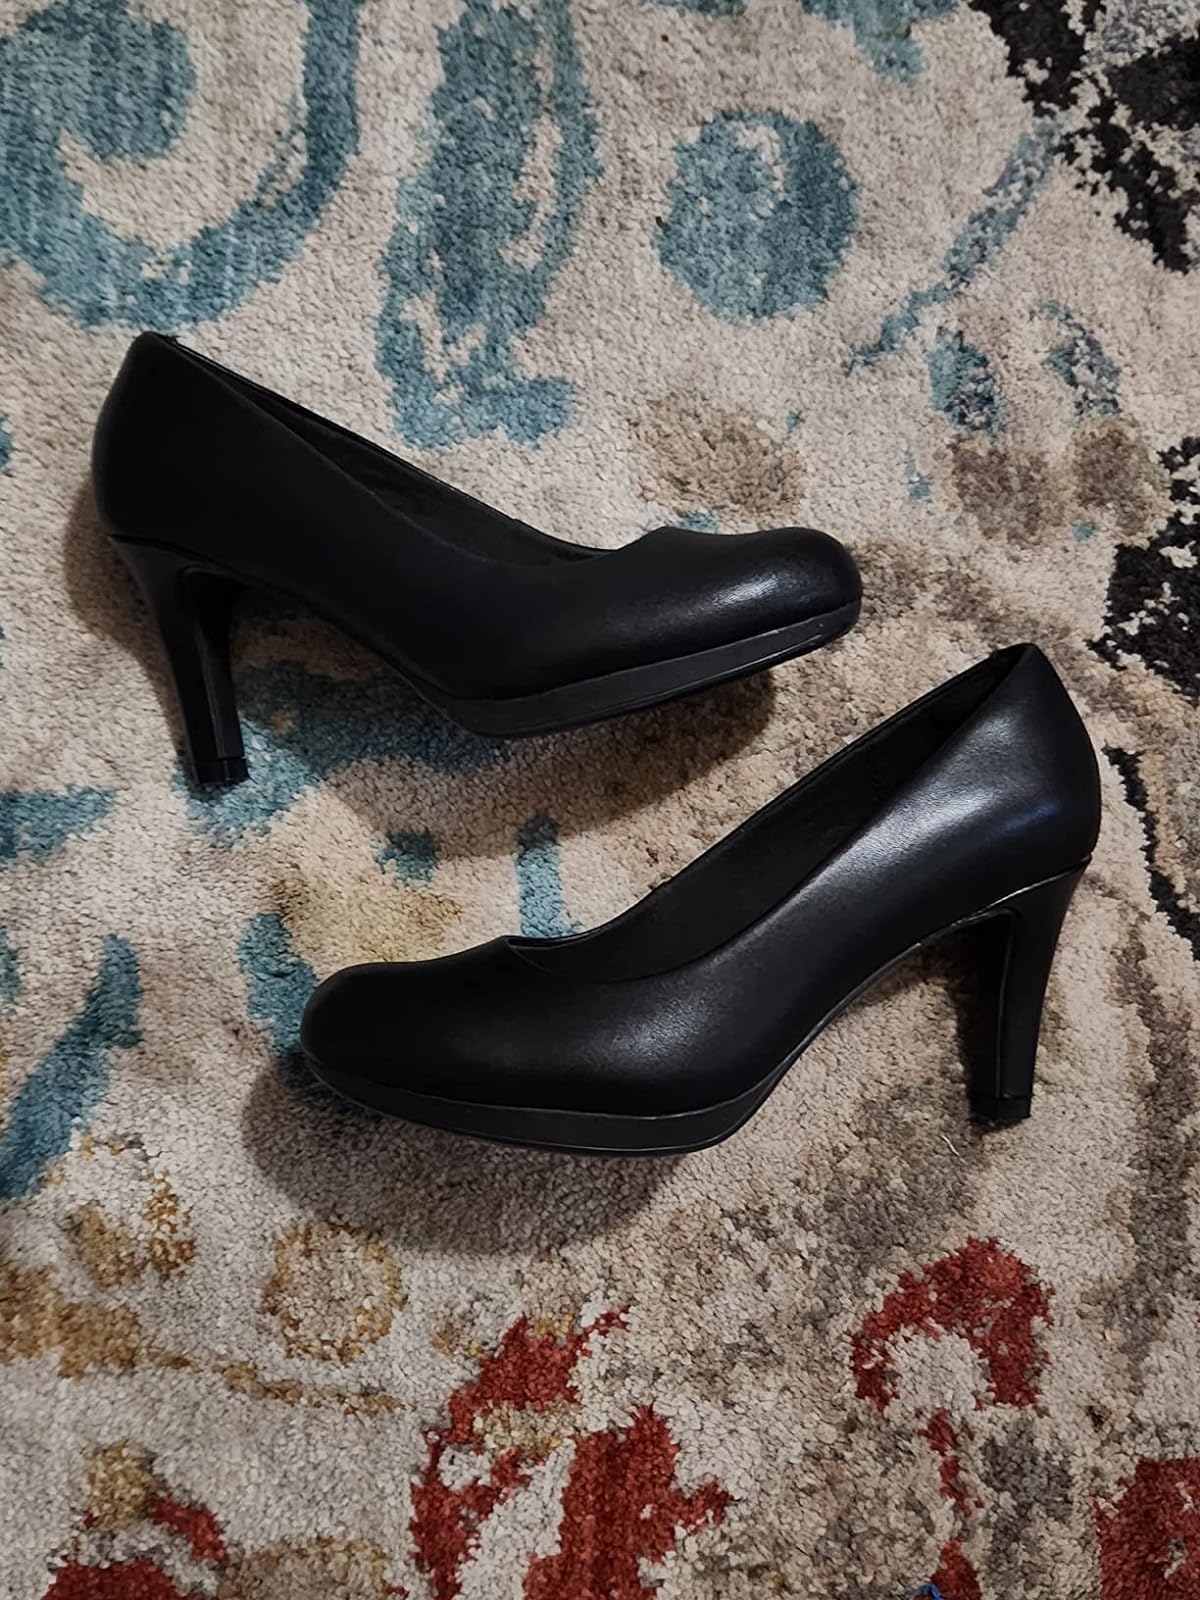 Review photo of the black pumps